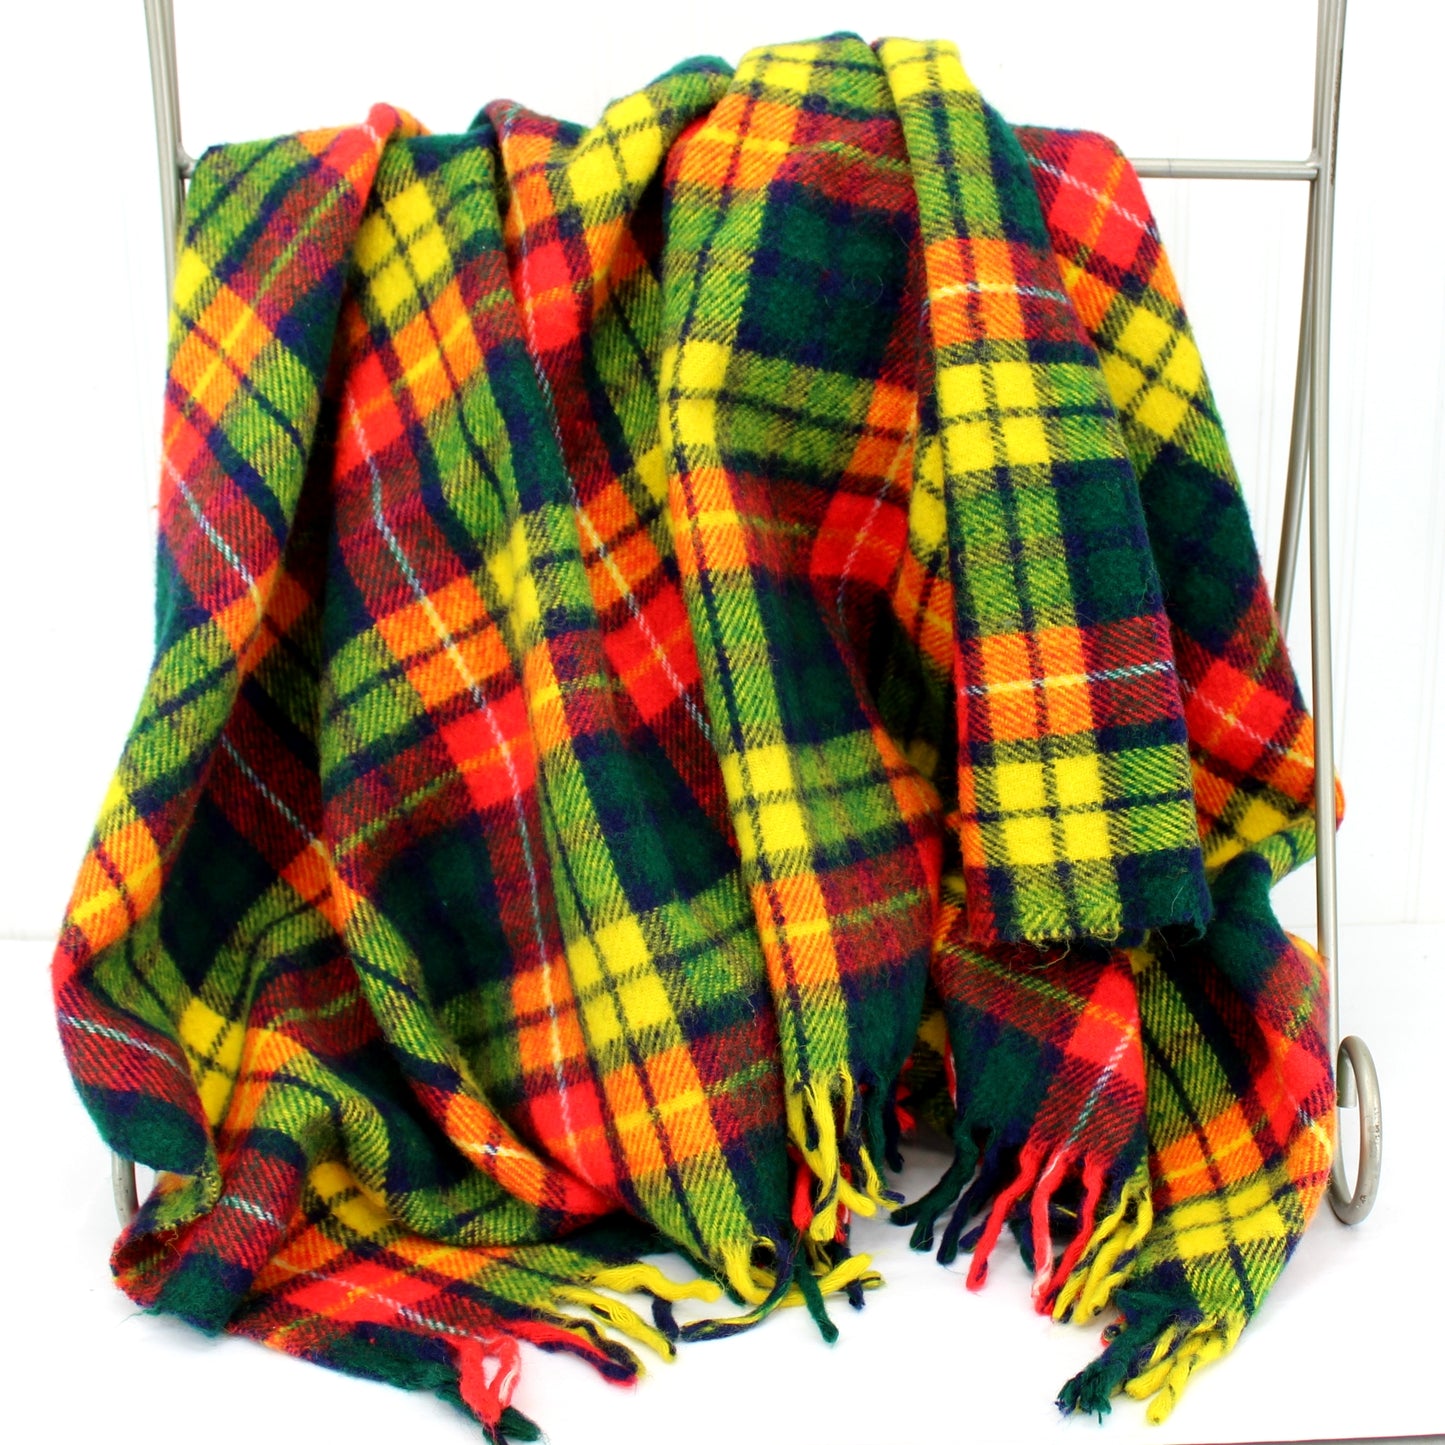 Faribo Classic Wool Throw Blanket Red  Green Yellow Plaid  54" by 52" USA